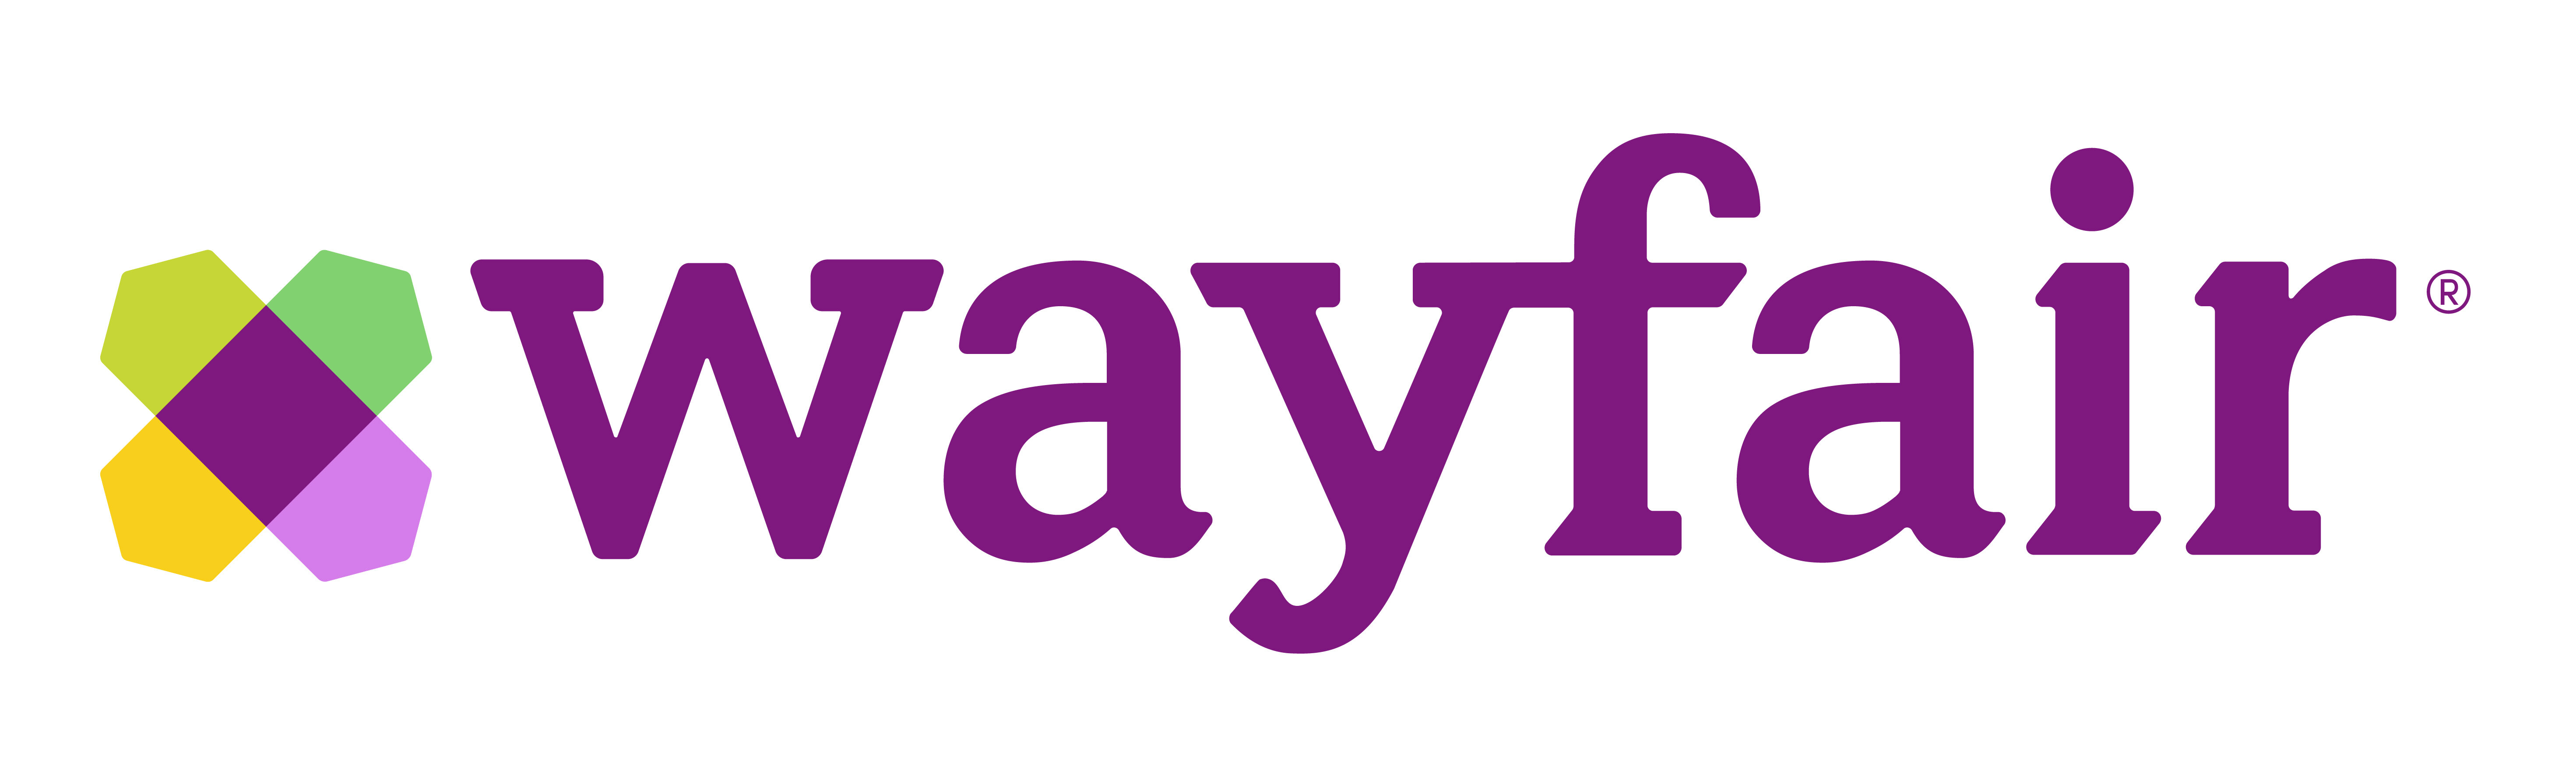 Under Mattress Support now available at Wayfair